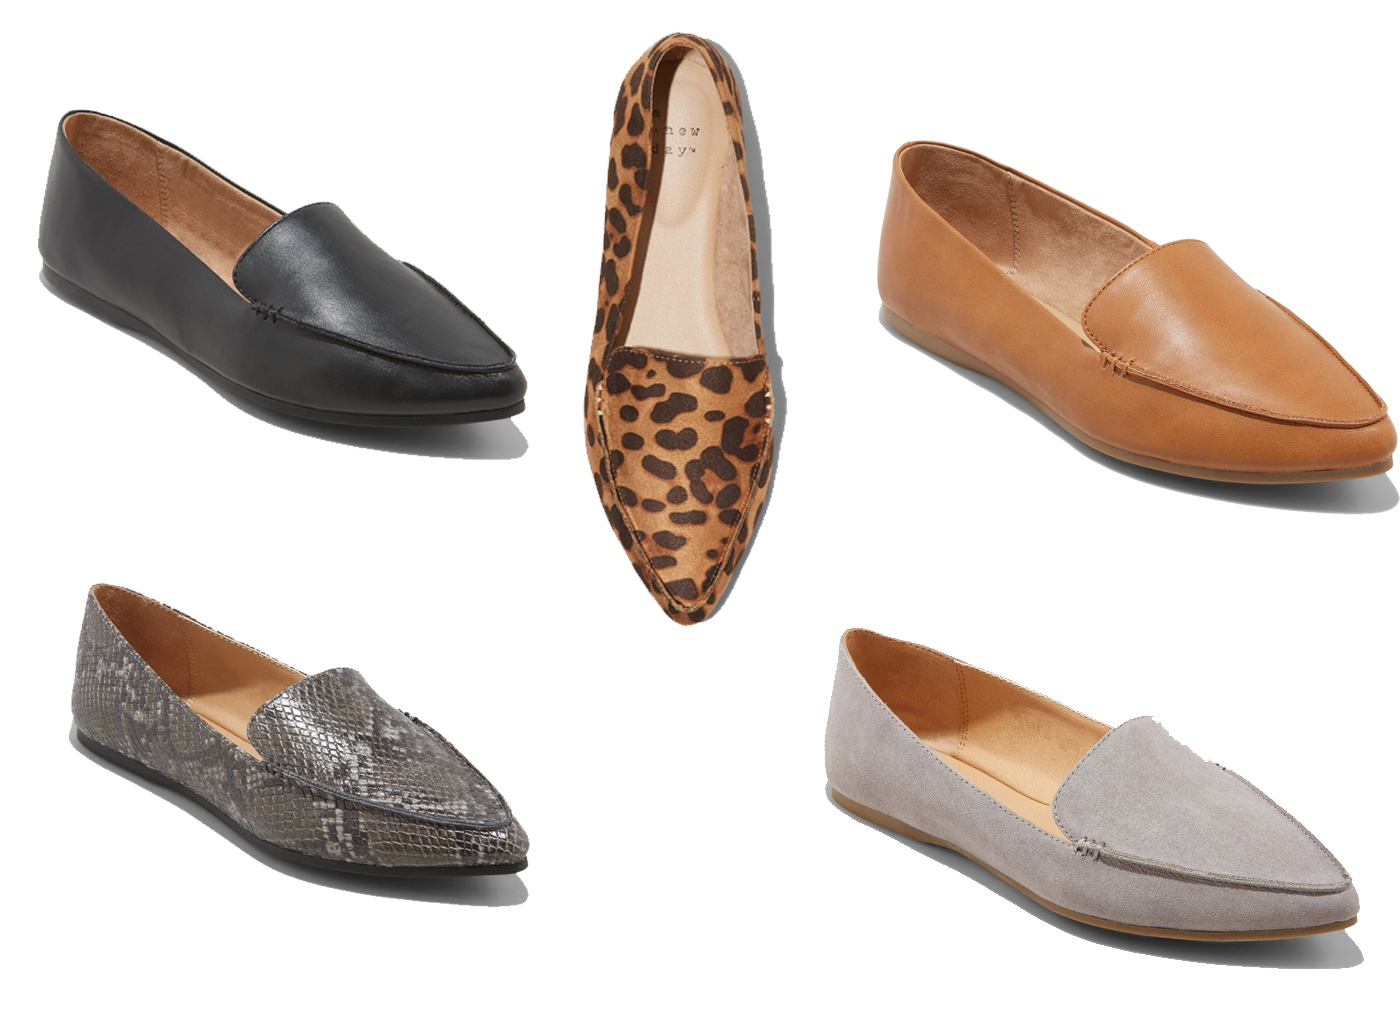 comfortable flats for women